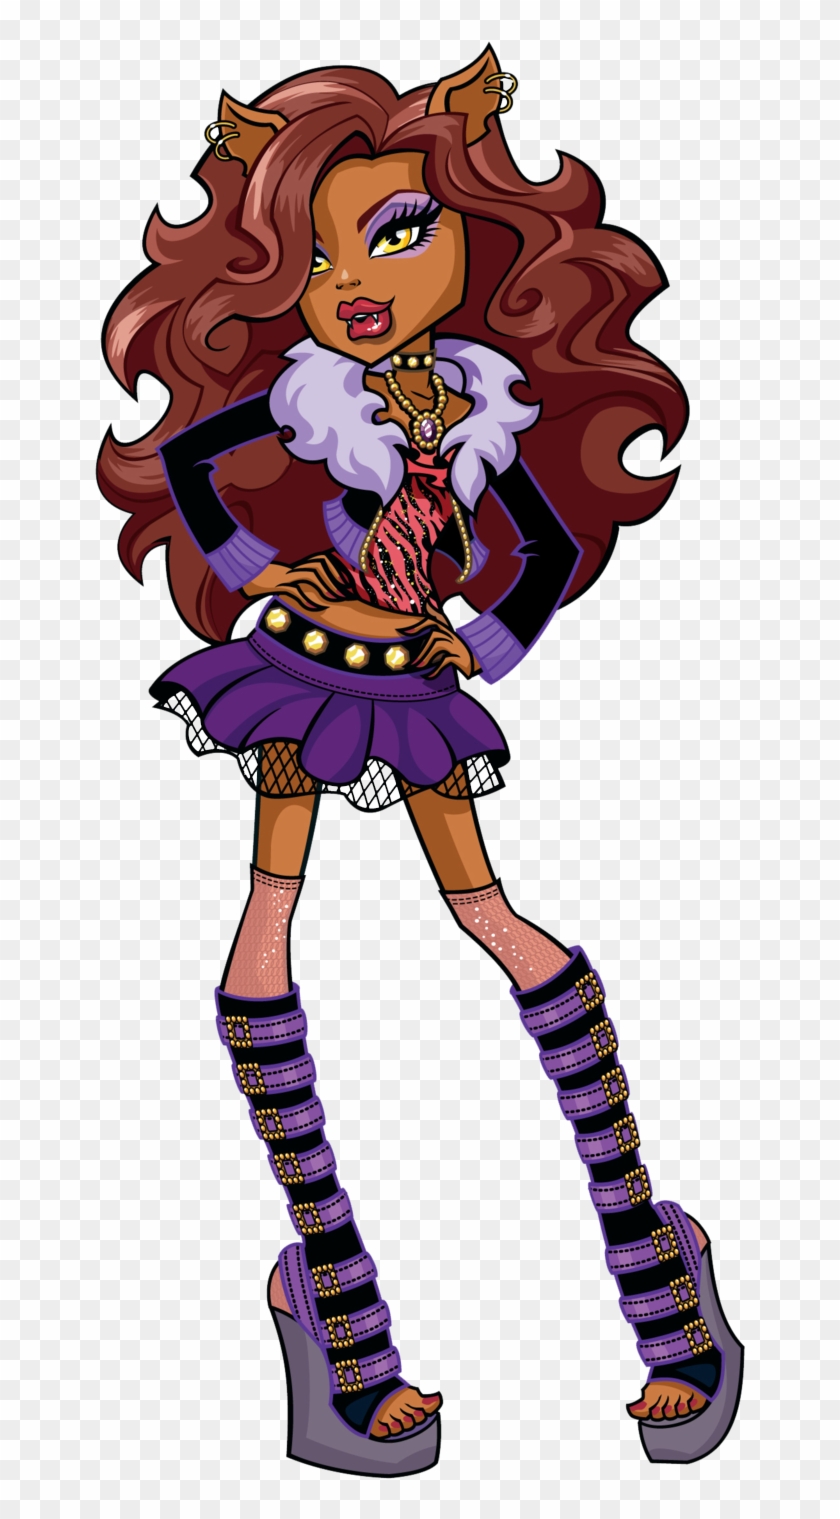 Confident And Fierce, She Is Considered The School's - Monster High Clawdeen Wolf Cartoon Clipart #3423340